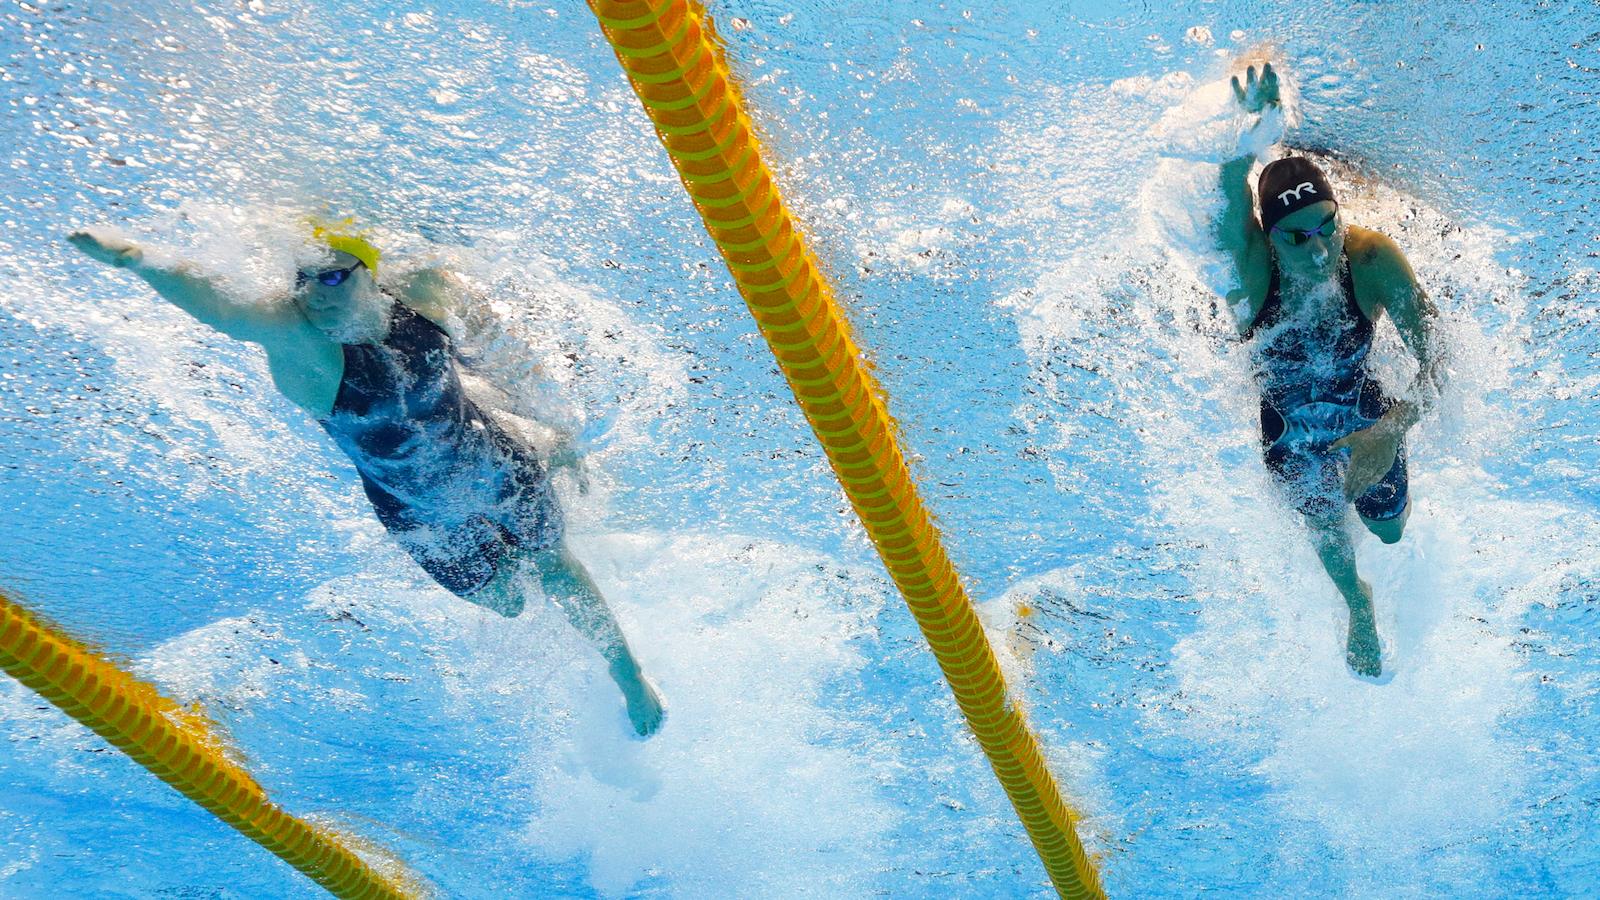 Researchers believe currents in the Olympic pool may have given some swimme...